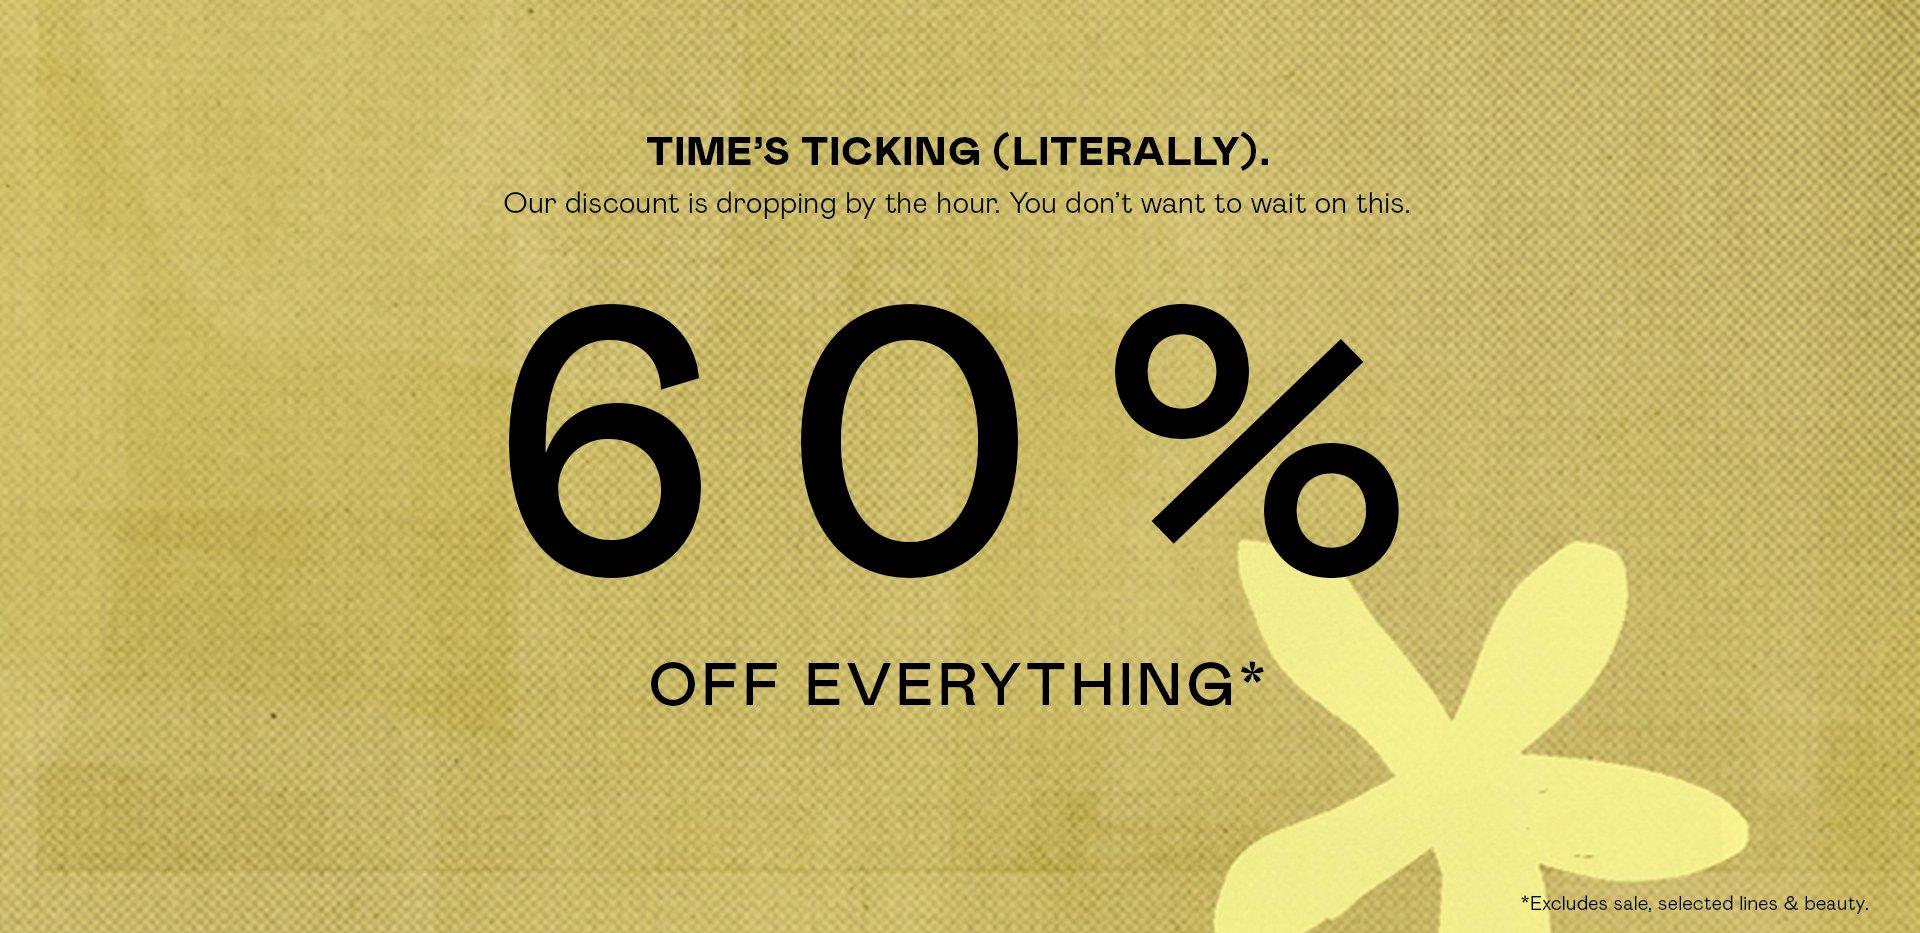 60% off everything*